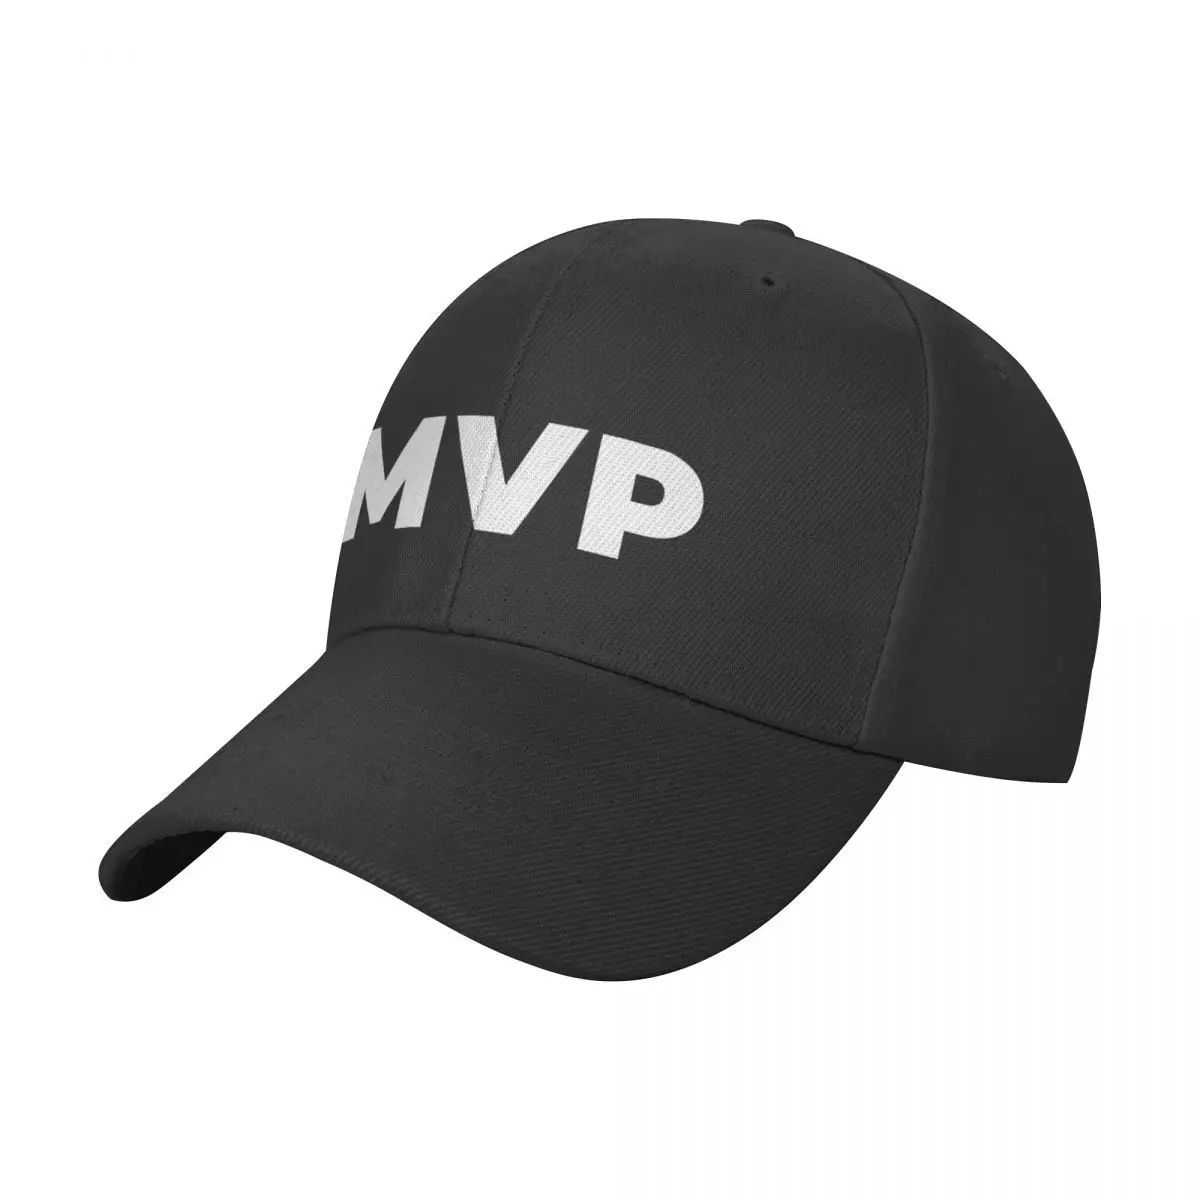 MVP Baseball Cap Big Size Hat New Hat Hat Female Men's 2021 summer new solid color embroidery high quality hat ladies hat brand hat unisex casual sunshade baseball cap